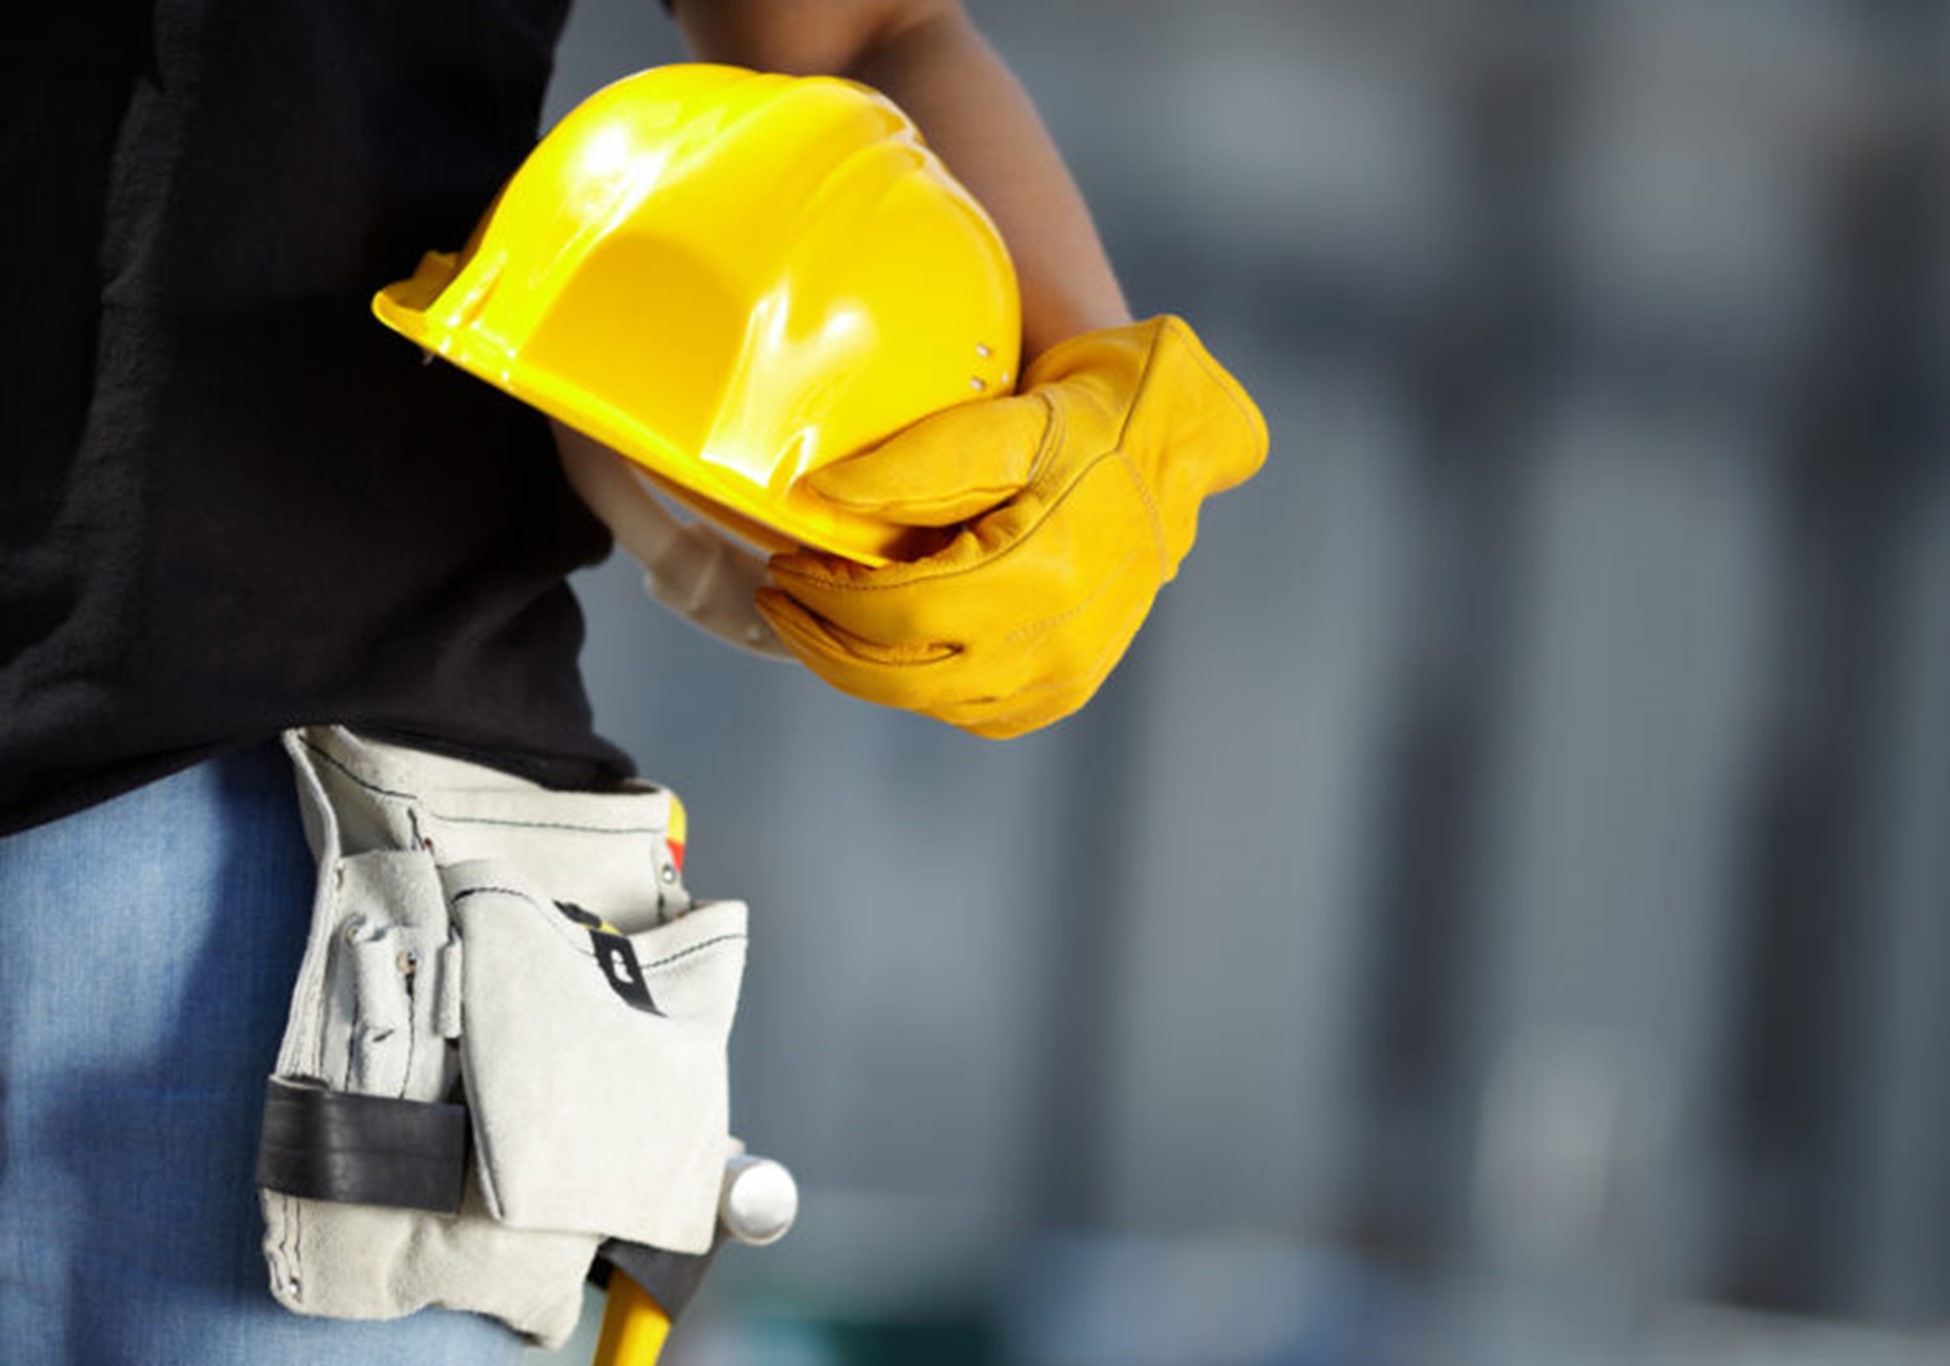 The Role of Employer Responsibility in Workplace Safety